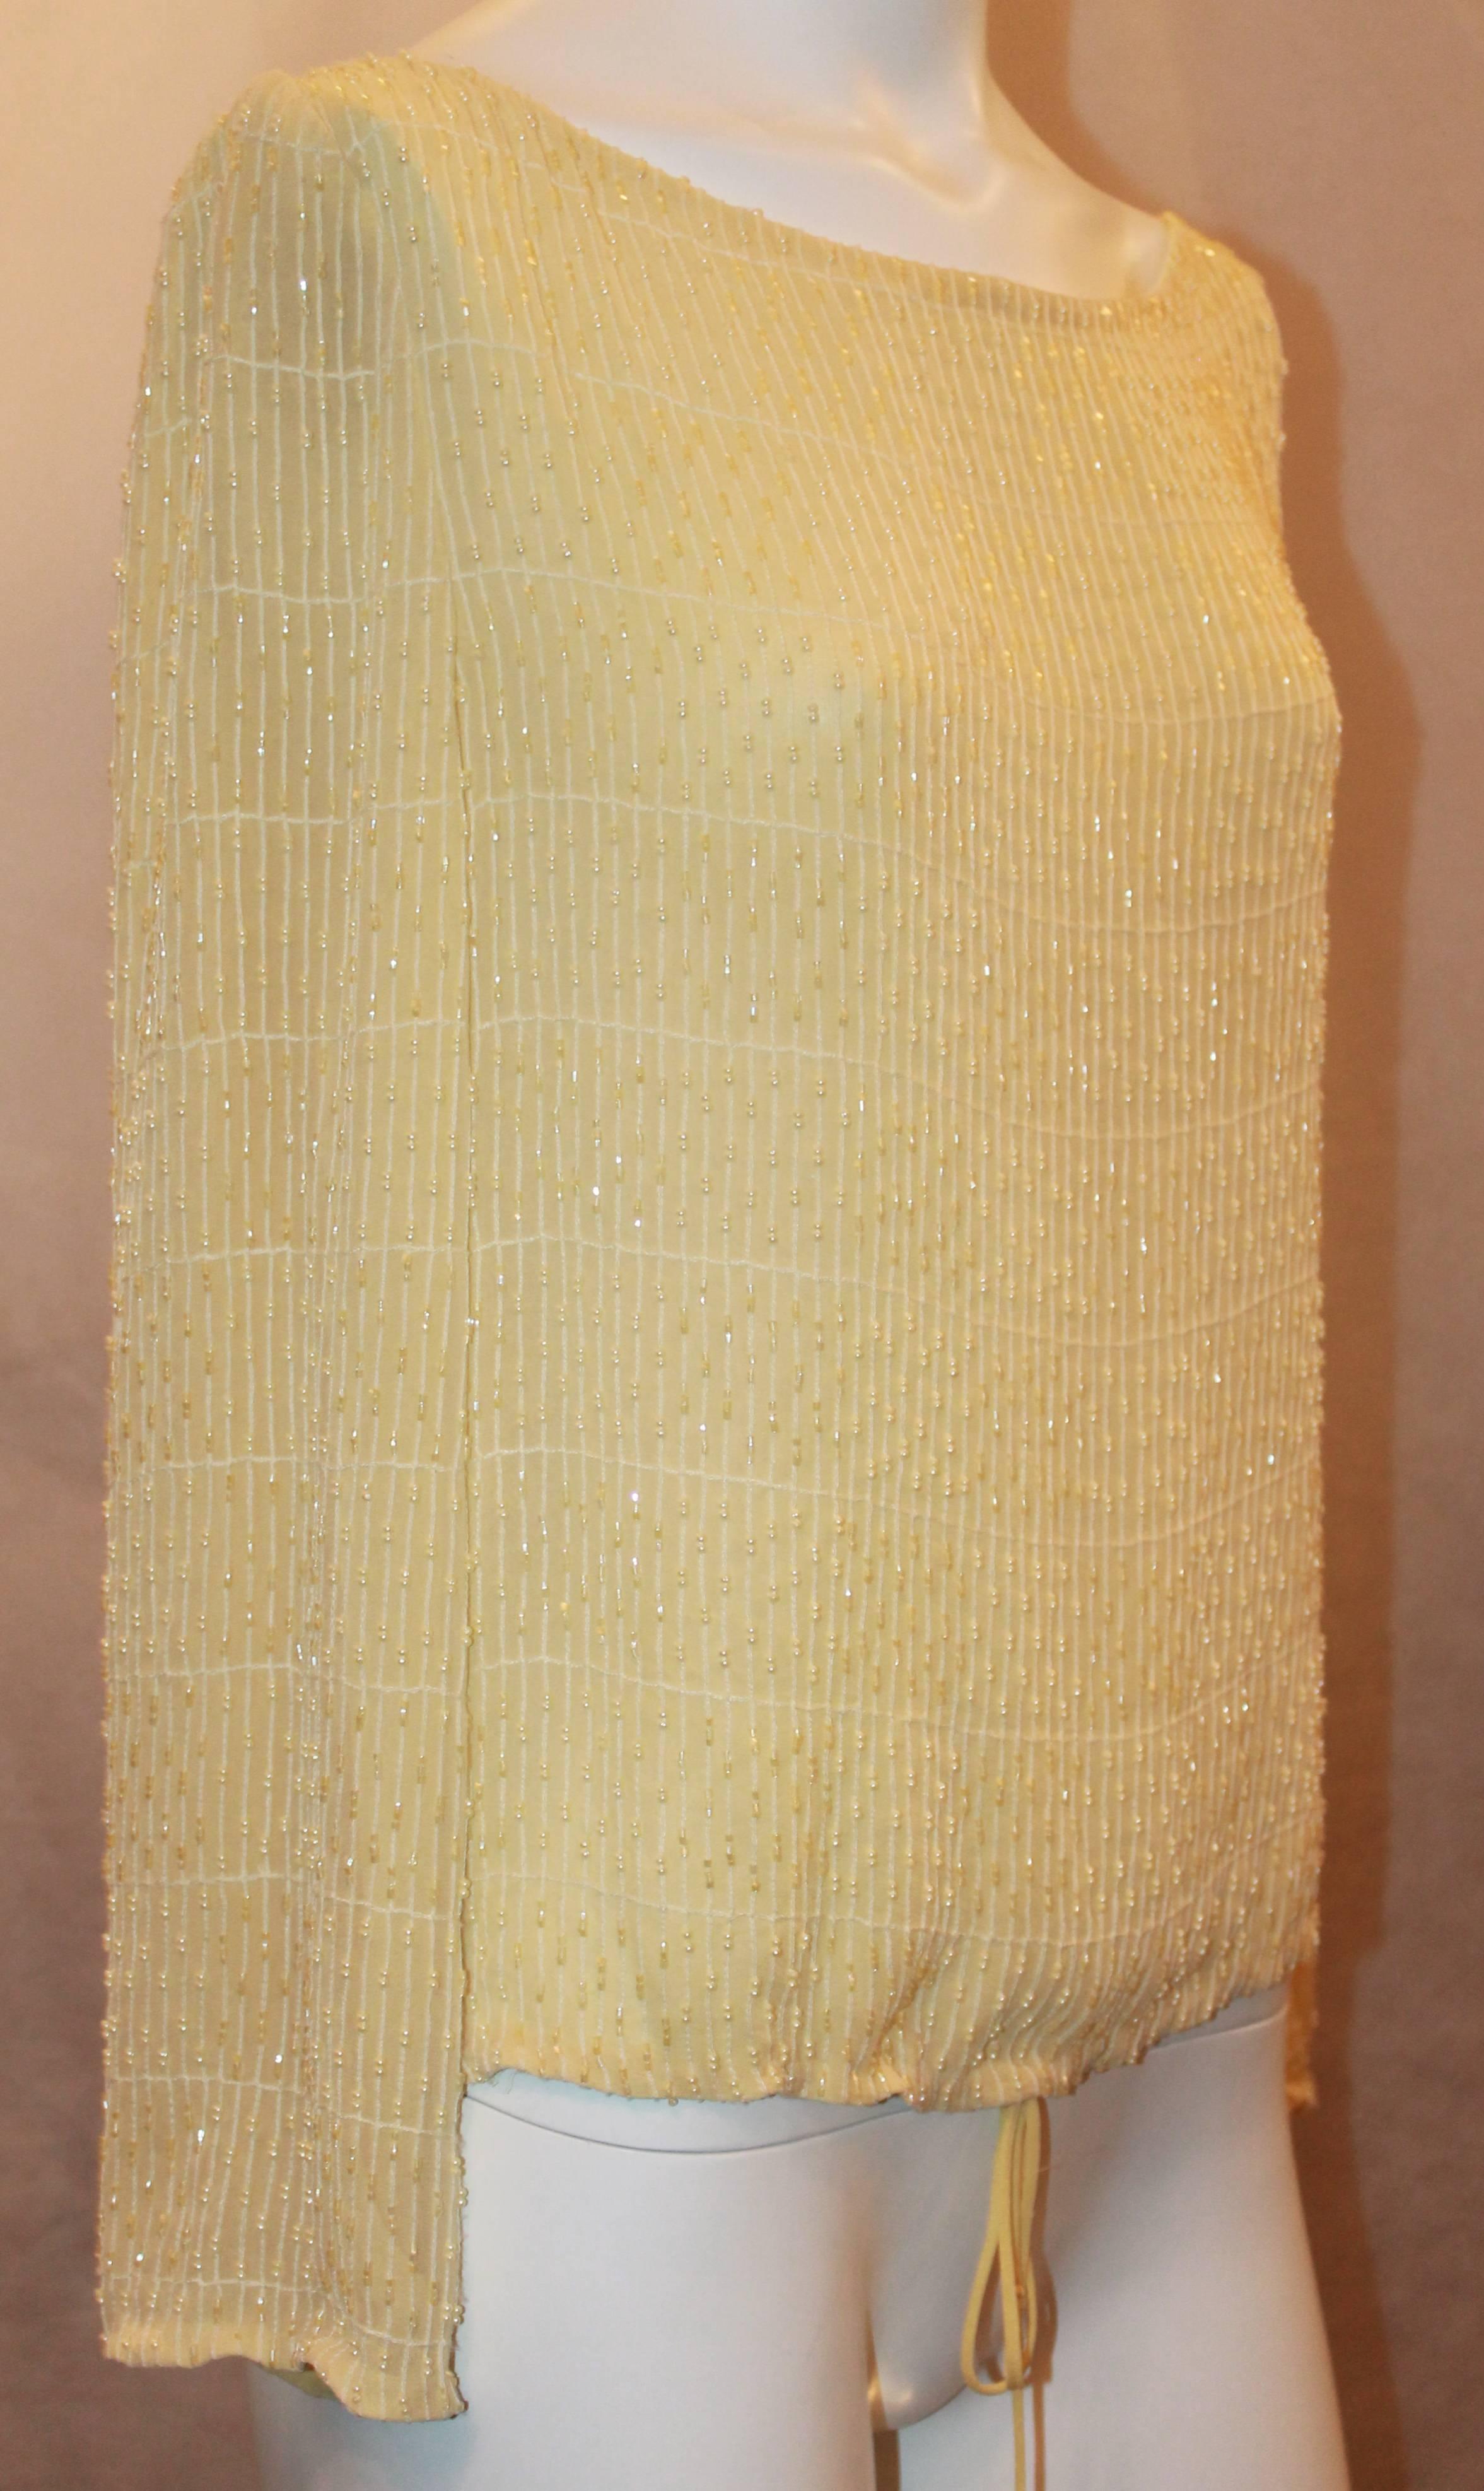 Badgley Mischka Pale Yellow Silk Chiffon Long Sleeve Top w/ Beading - 4.  This lovely top is in good condition with only some wear.  It features a beautiful silk chiffon material, pearls and beads, and a cinched bottom and sleeves.  It is a peasant